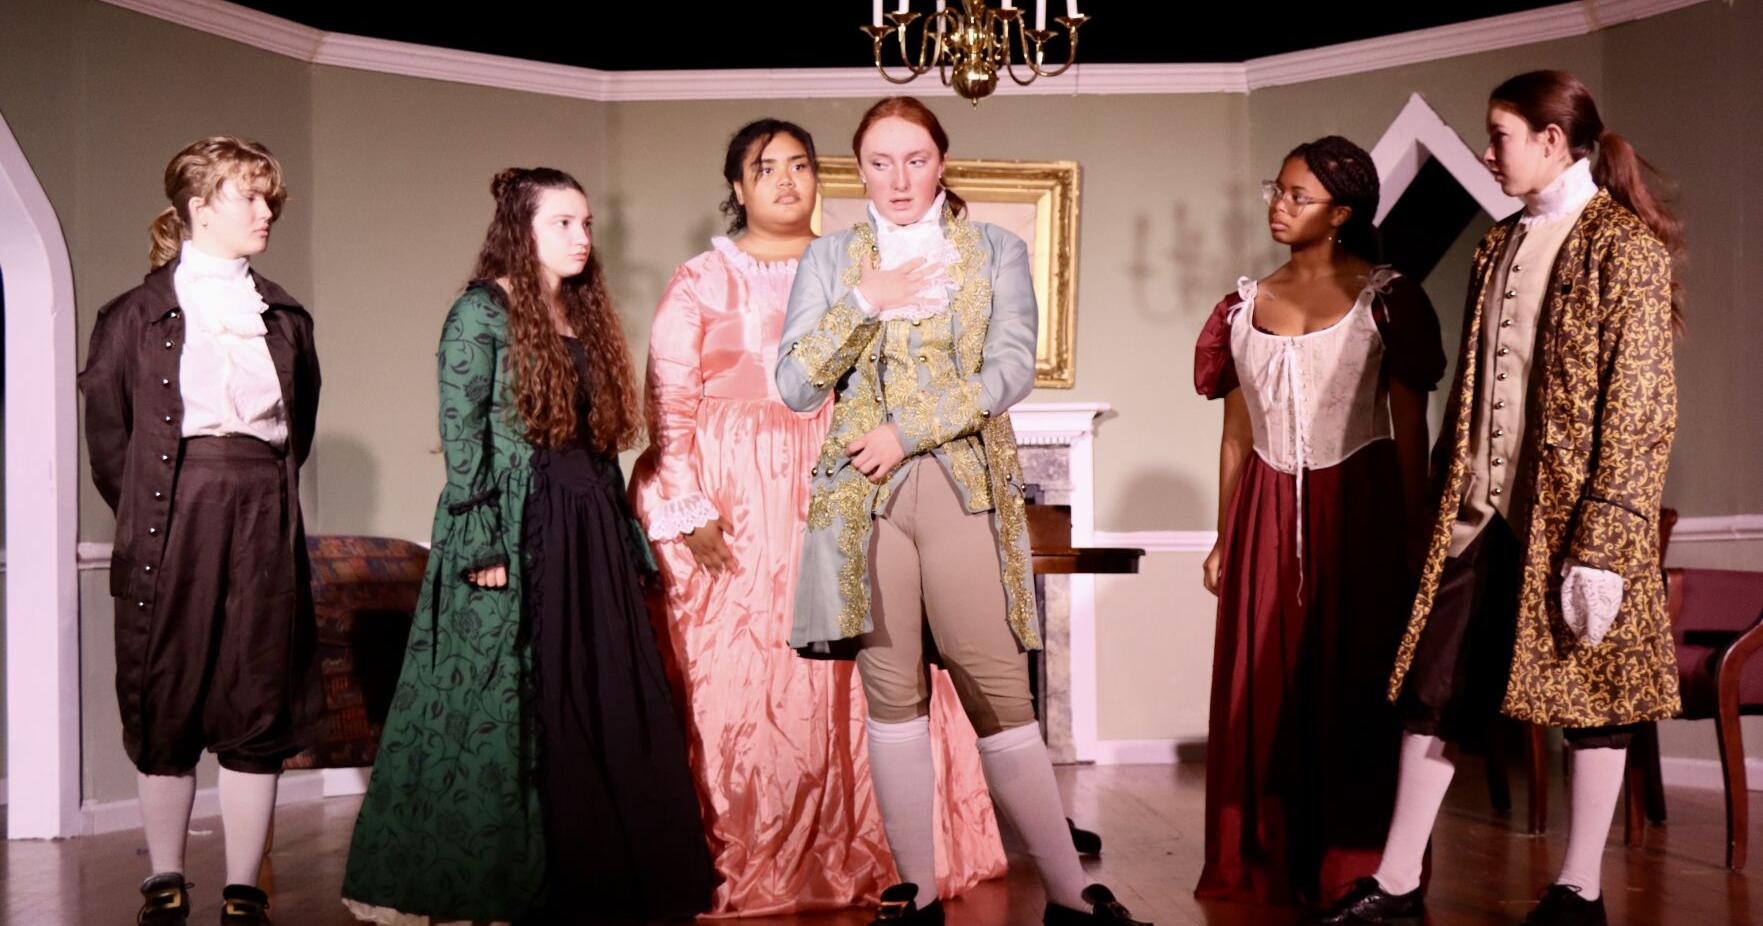 Cappies Review: 'The Hamilton Conspiracies' at the Foxcroft School